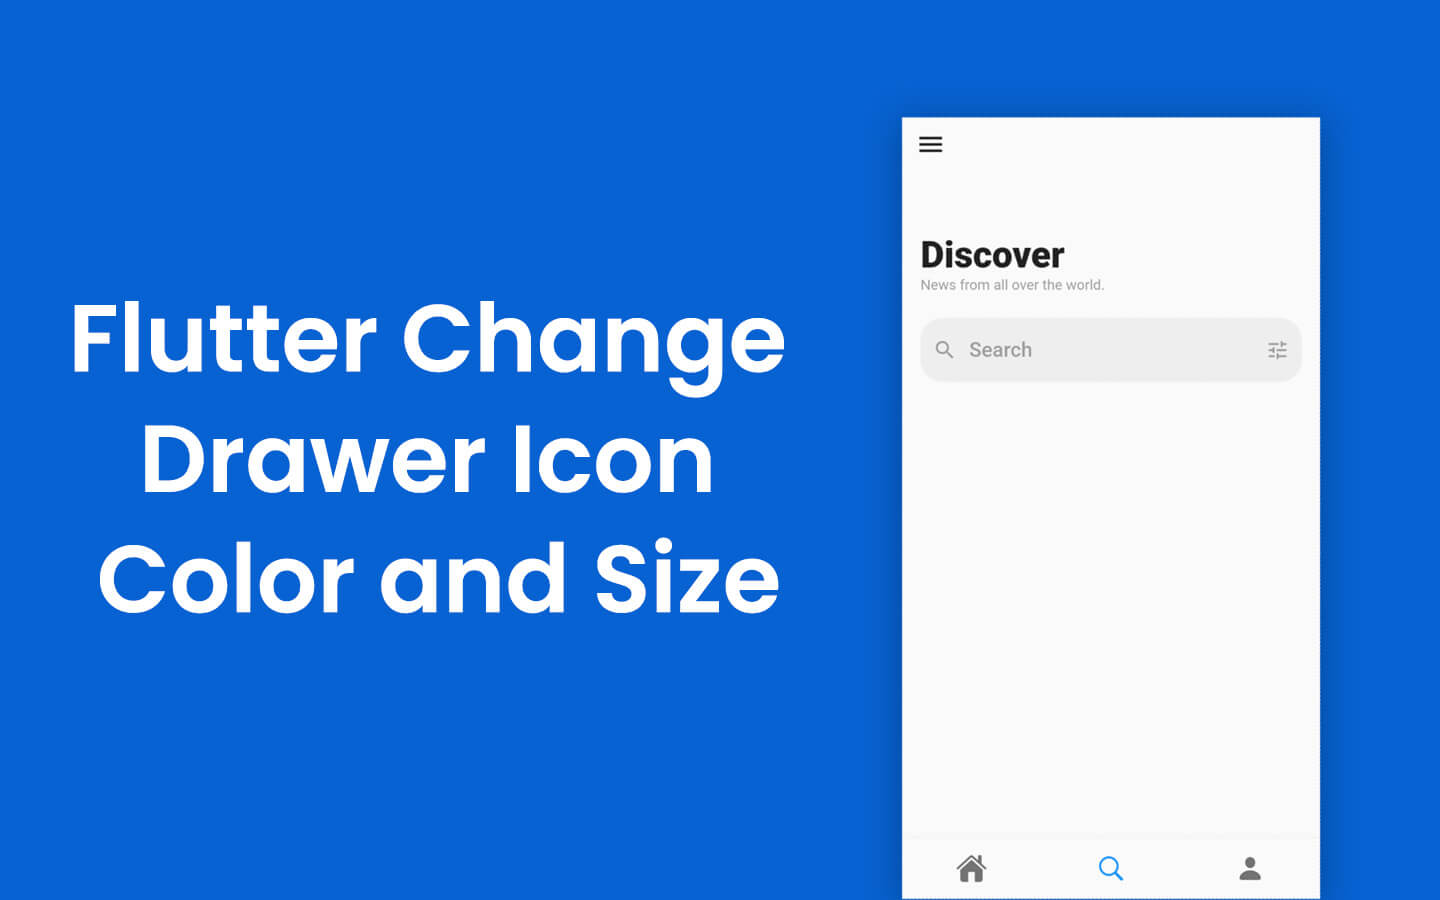 Flutter Change Drawer Icon Color and Size image